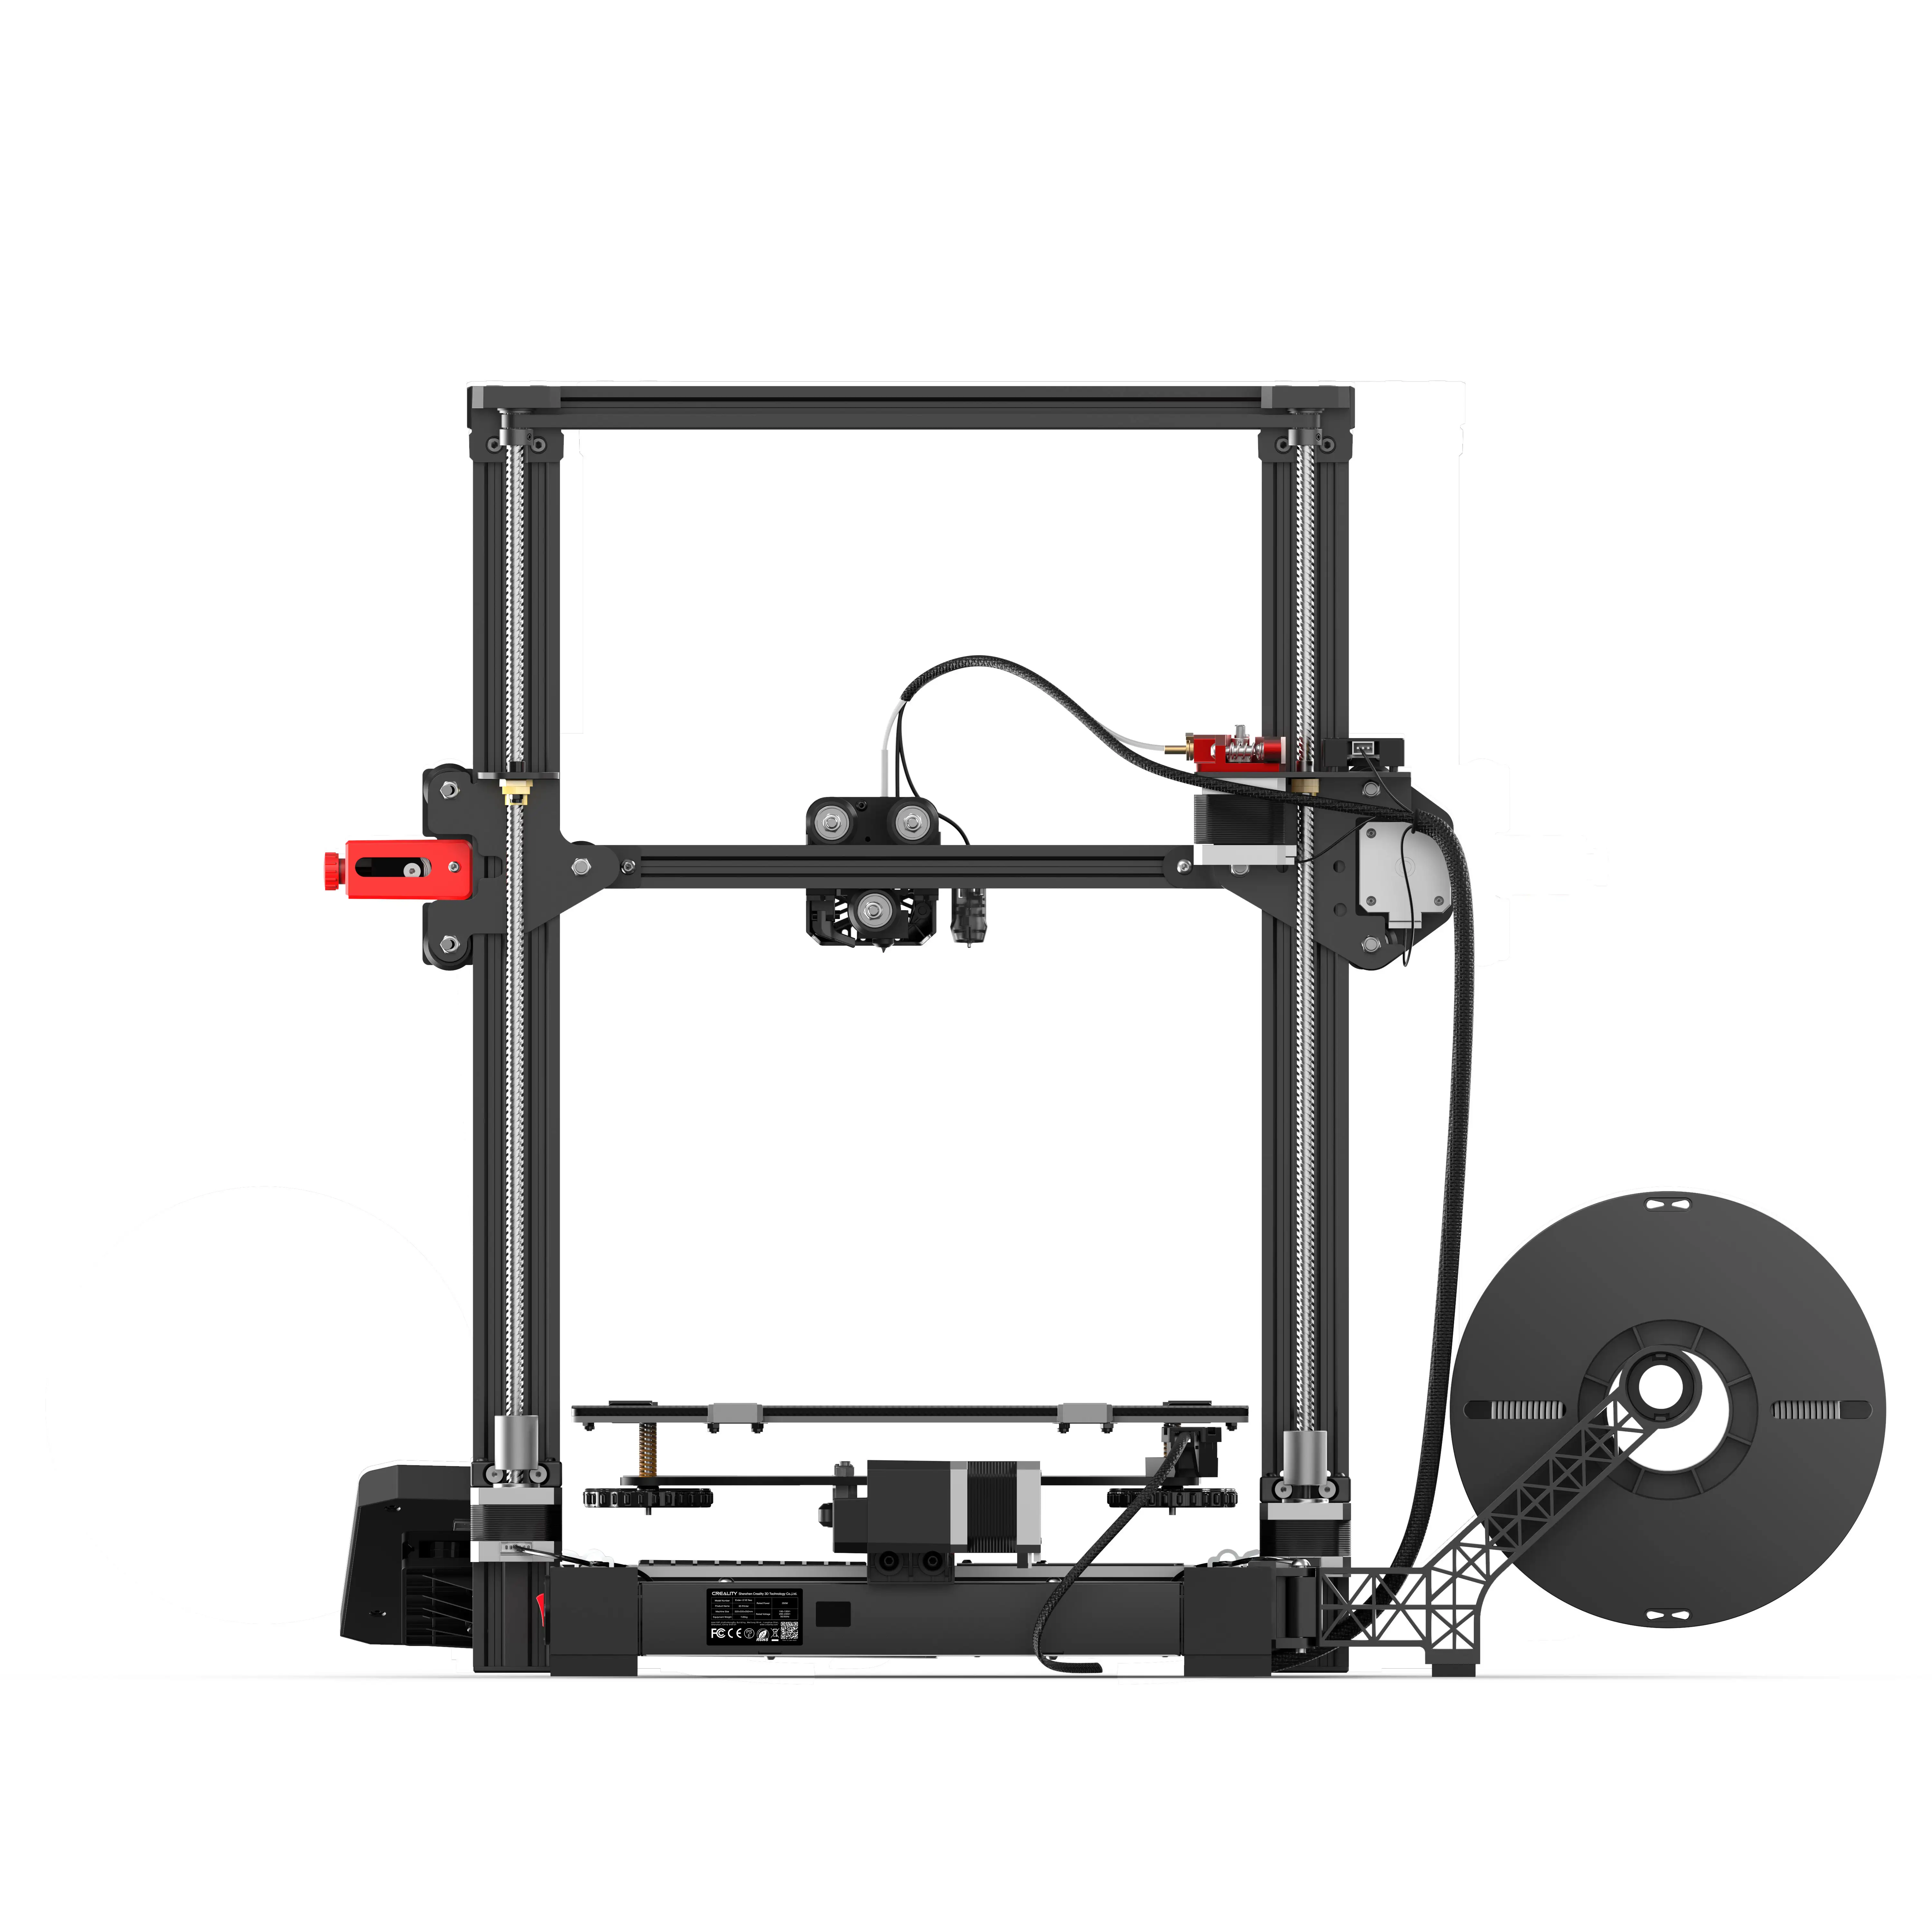 Creality Ender-3 Max Neo upgraded High-precision Dual Z-axis 3d printer for beginner